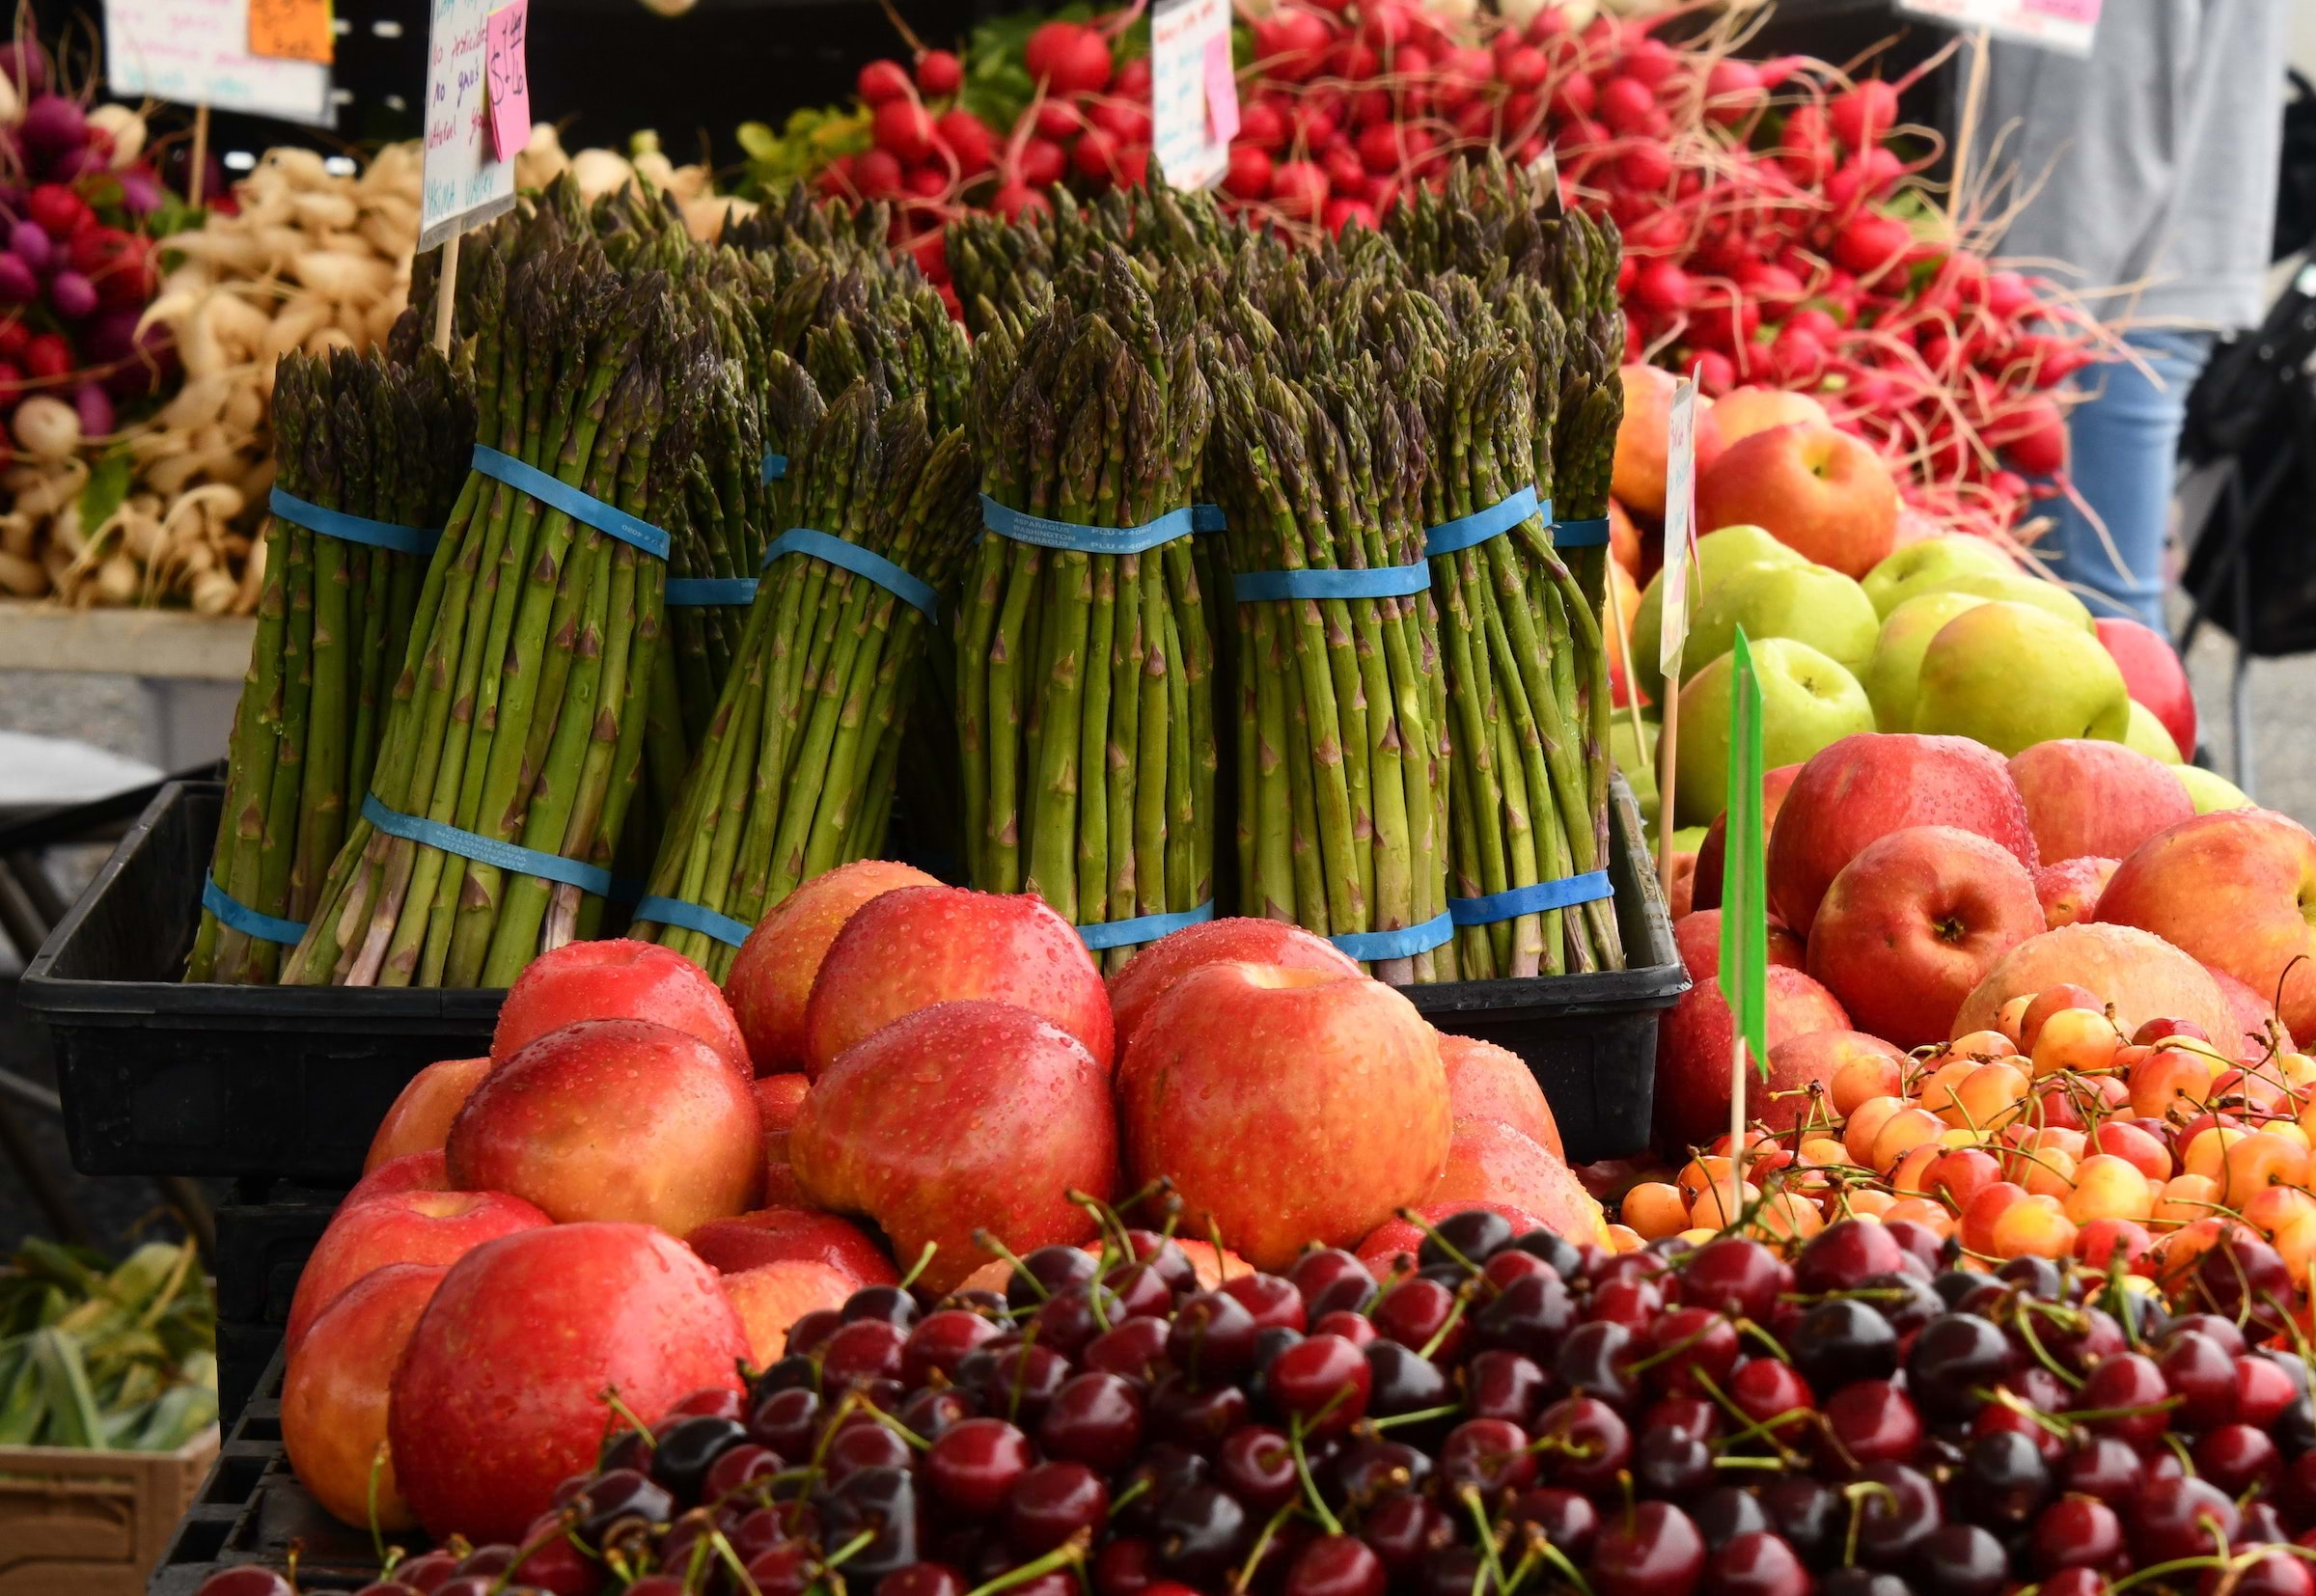 Guide to farmers' markets in London